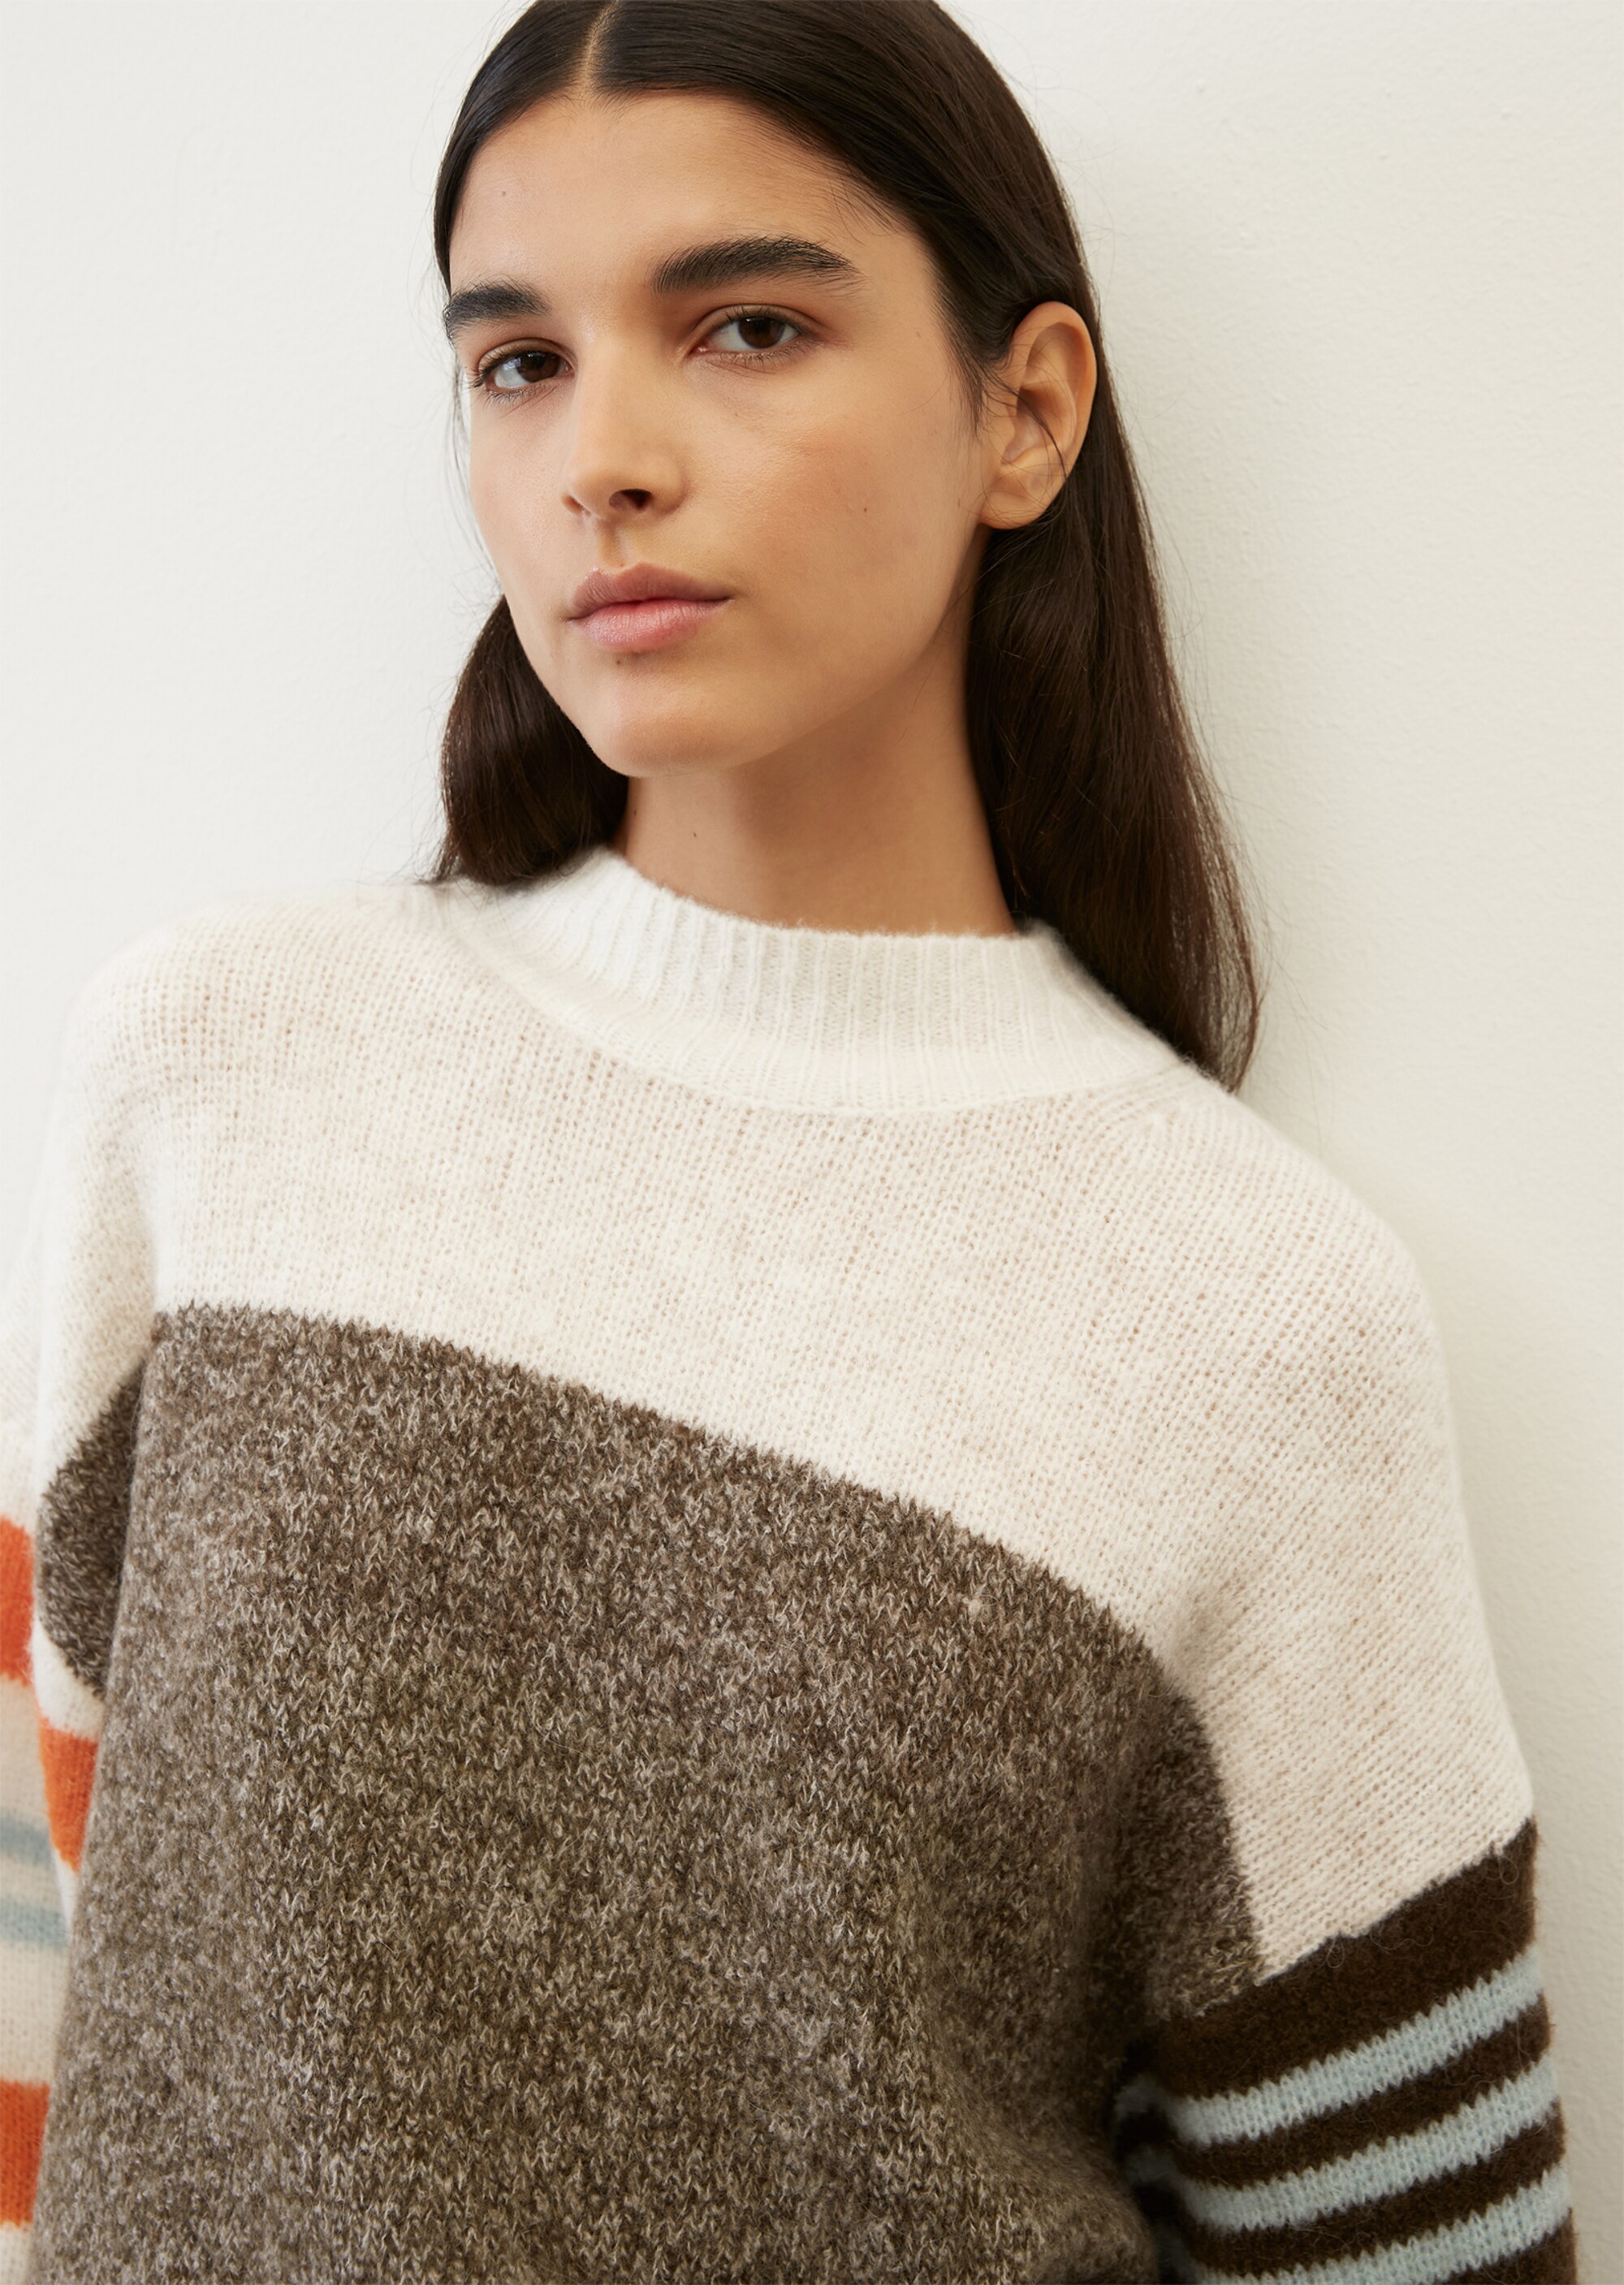 Striped, oversized knitted jumper with cosy alpaca and wool